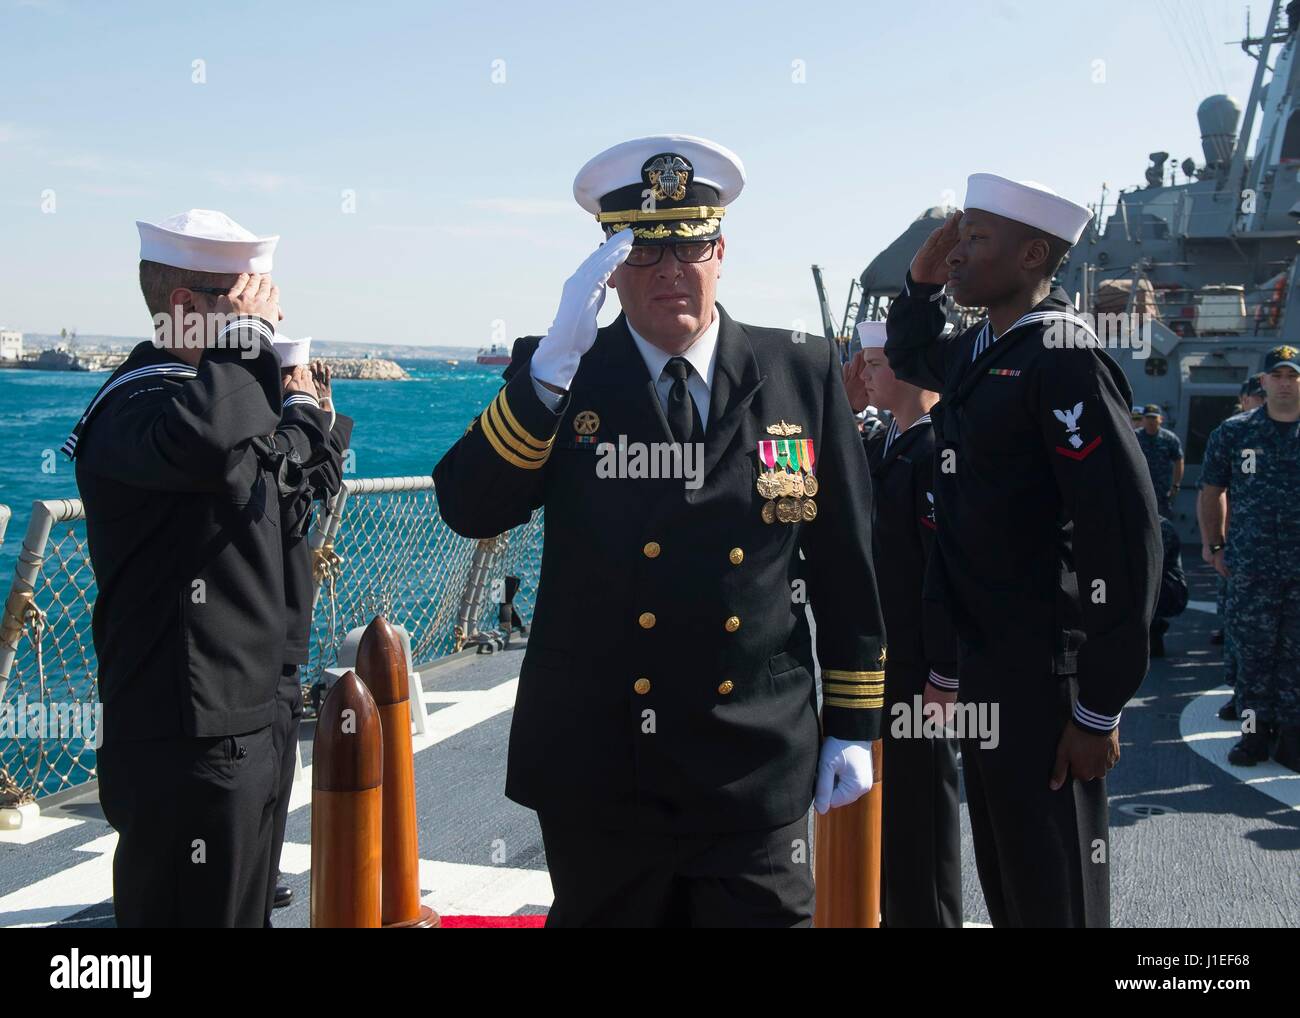 U.S. Navy Cmdr. Russell Caldwell is saluted by his crew during a routine change of command ceremony aboard USS Ross April 11, 2017 in Larnaca, Cyprus. Caldwell, led the ships missile assault on Syria on April 7th, turned over the helm to Cmdr. Bryan Gallo. Stock Photo